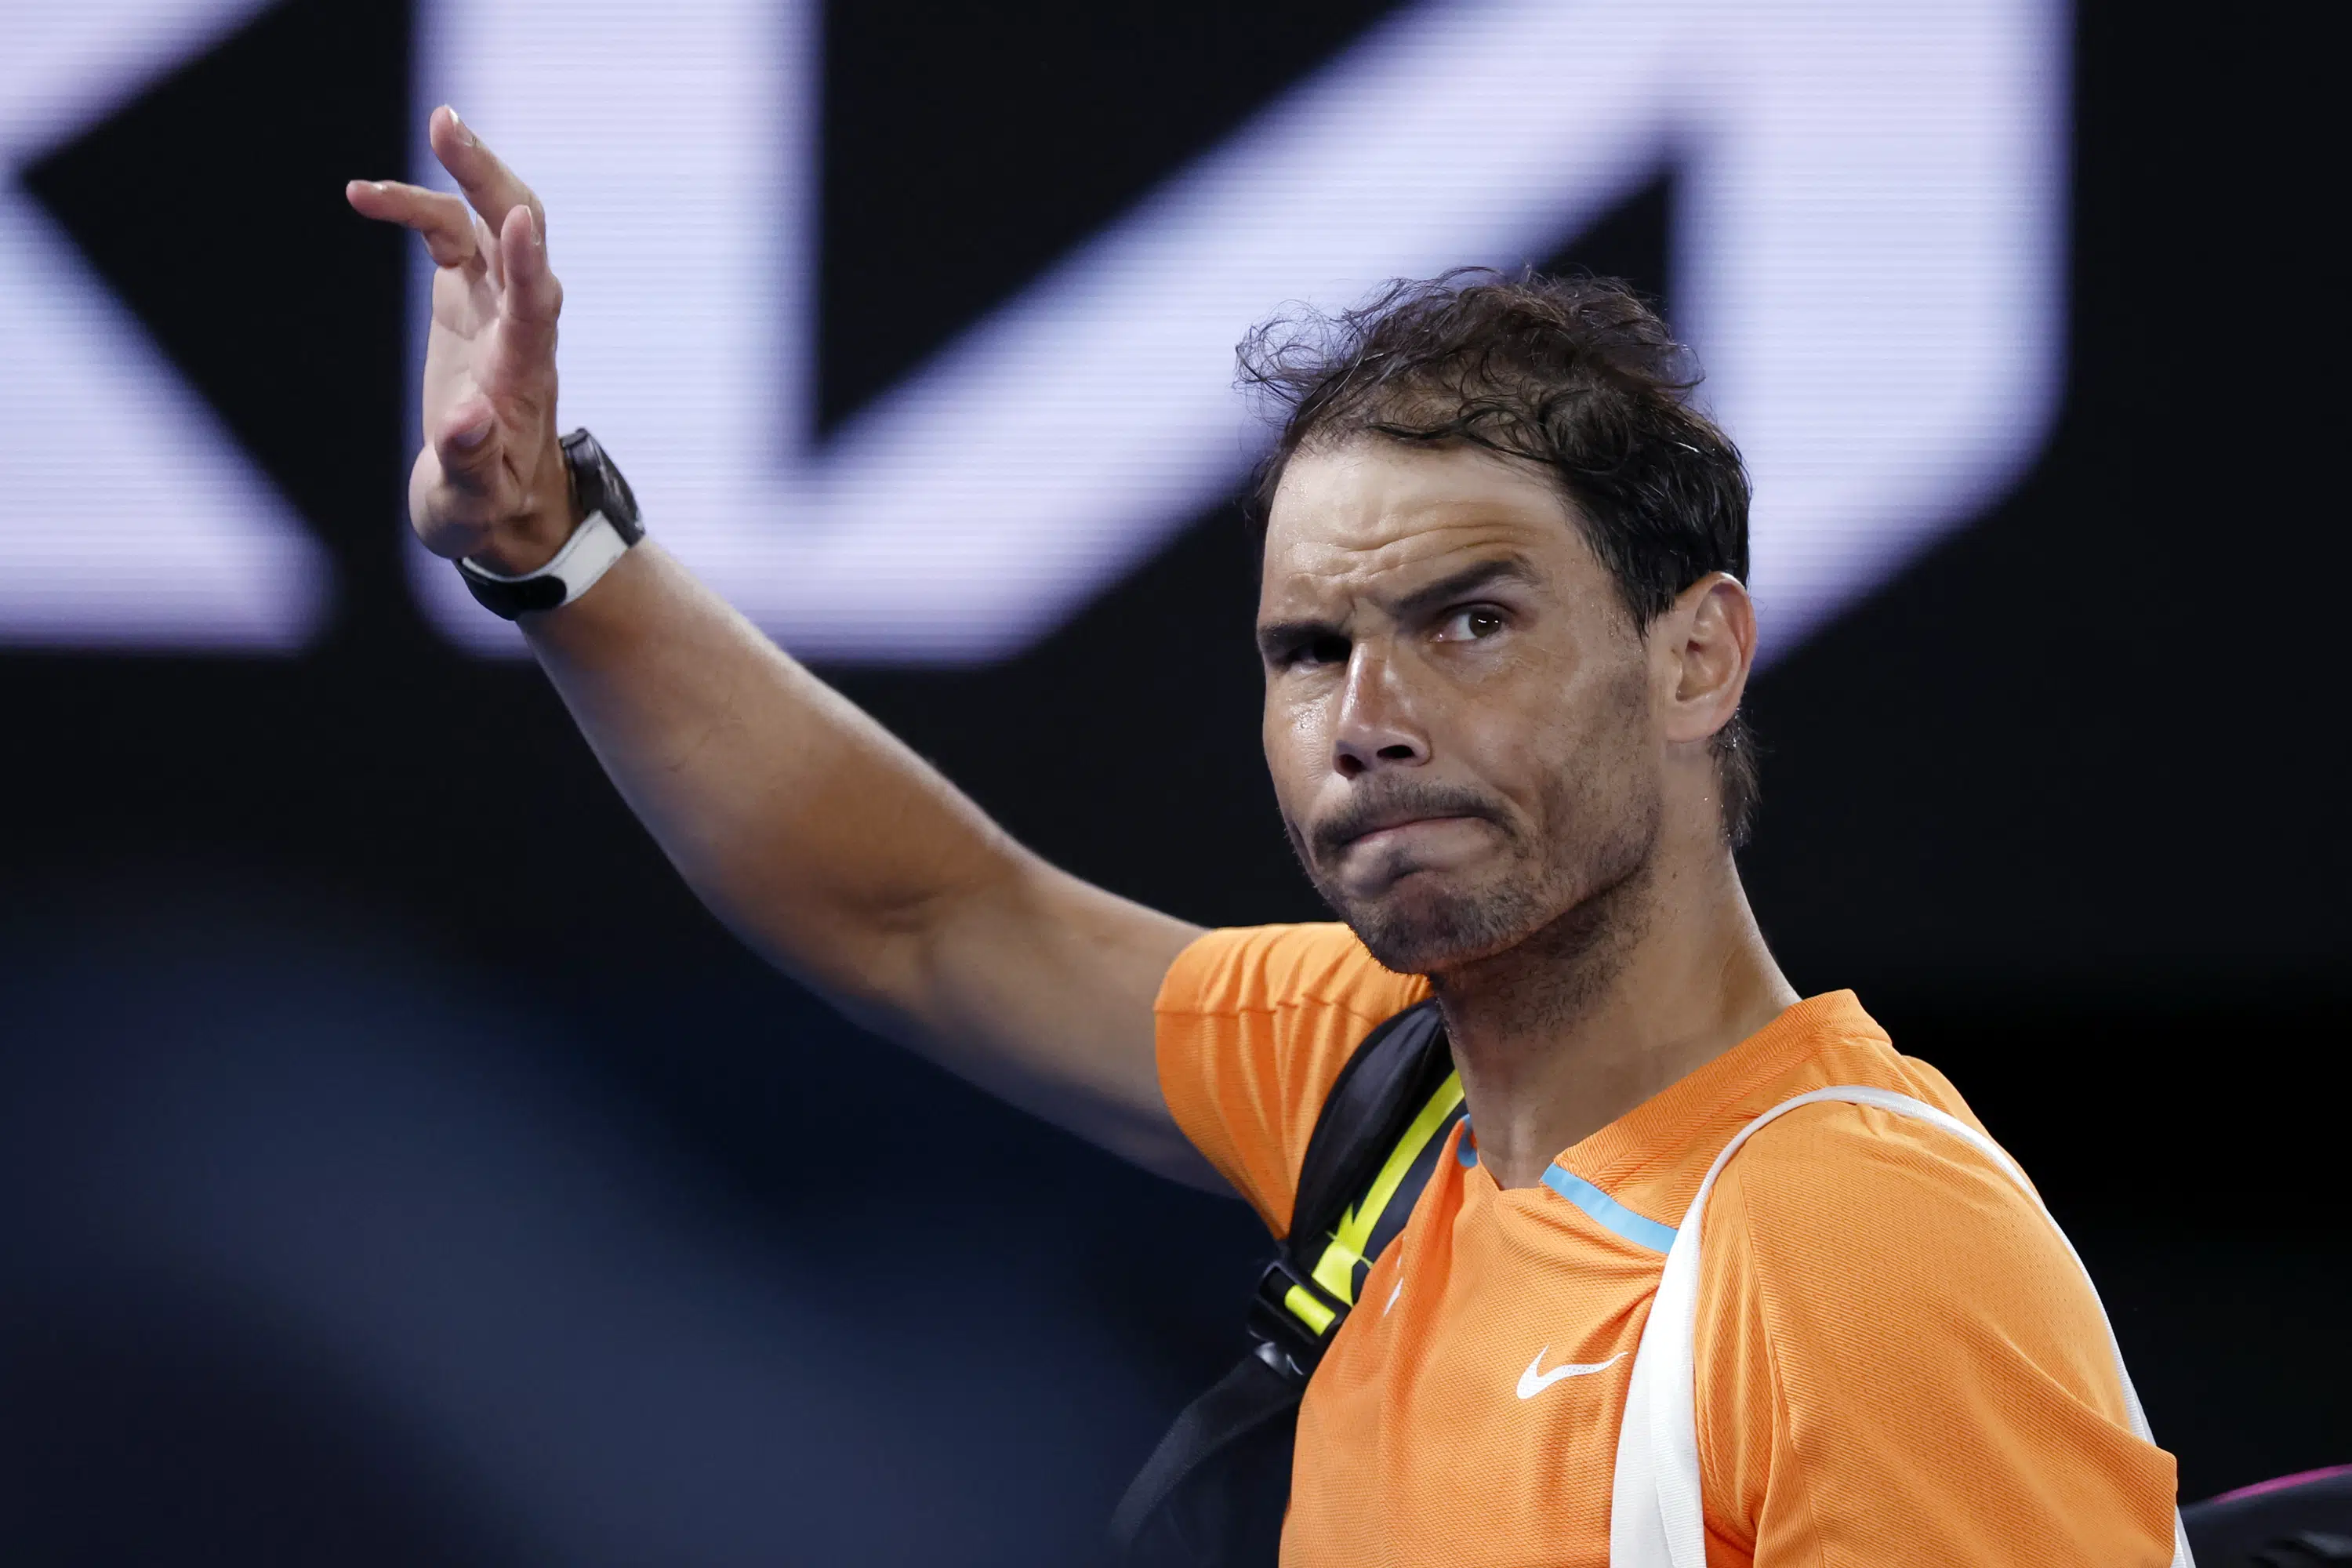 Analysis: Hard to know what’s next for Nadal with hip injury